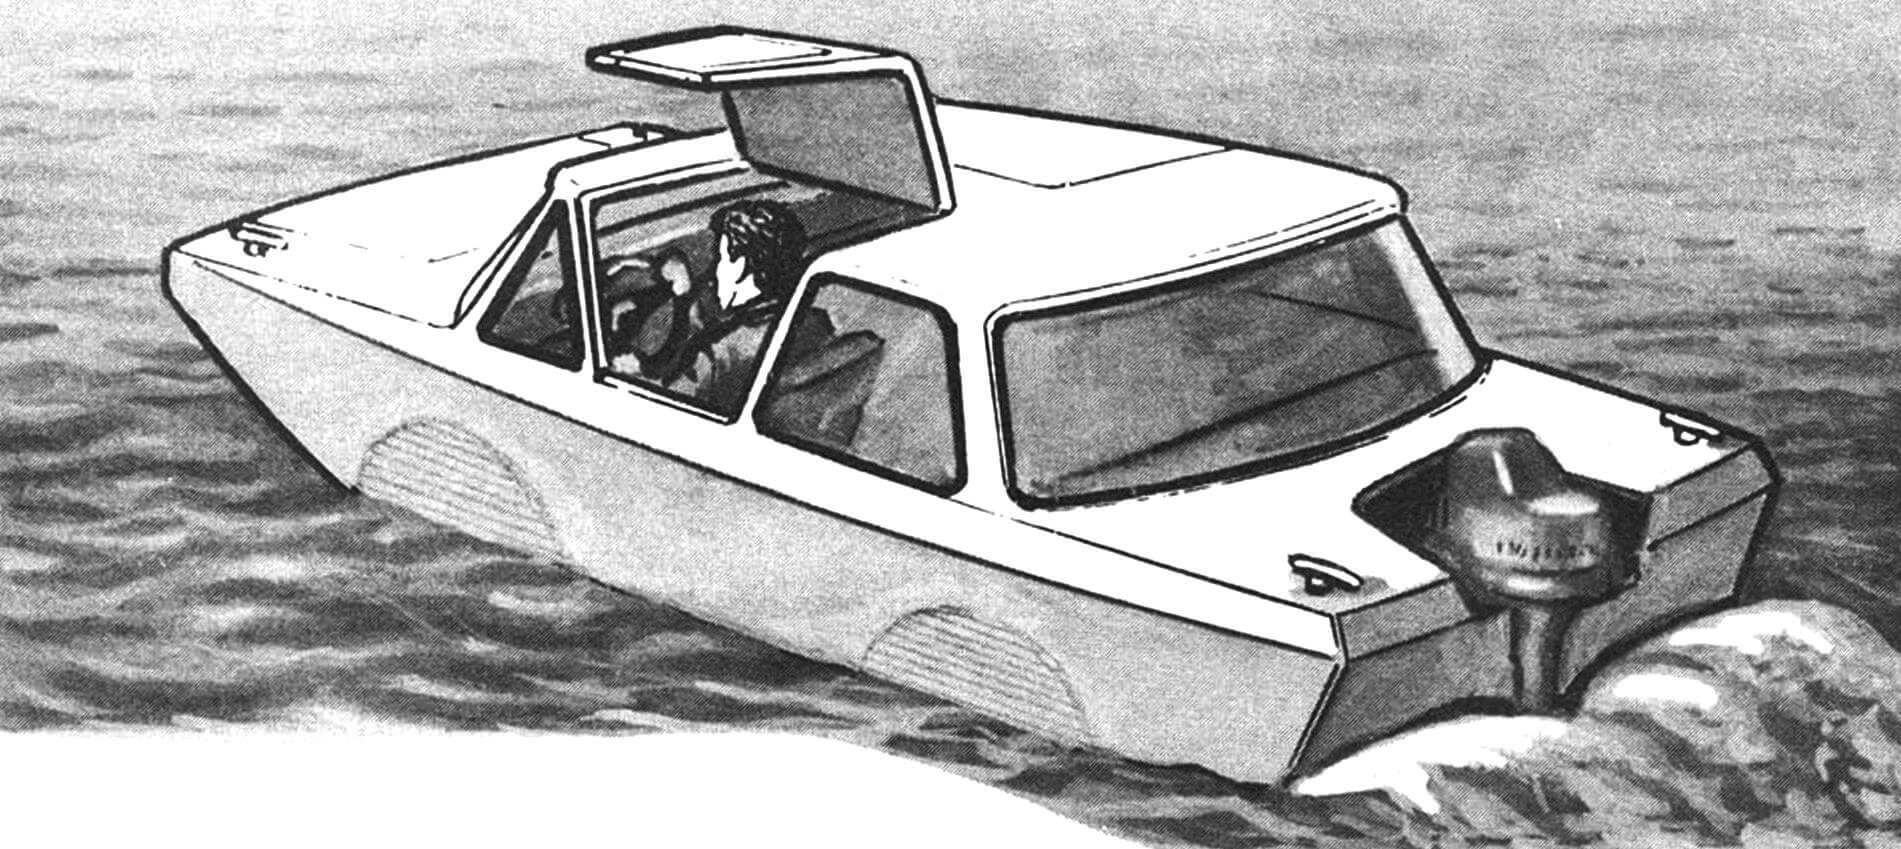 AMPHIBIAN? NO, QUASIAUTOMOBILE: a boat that successfully combines excellent seafaring qualities with limousine comfort.